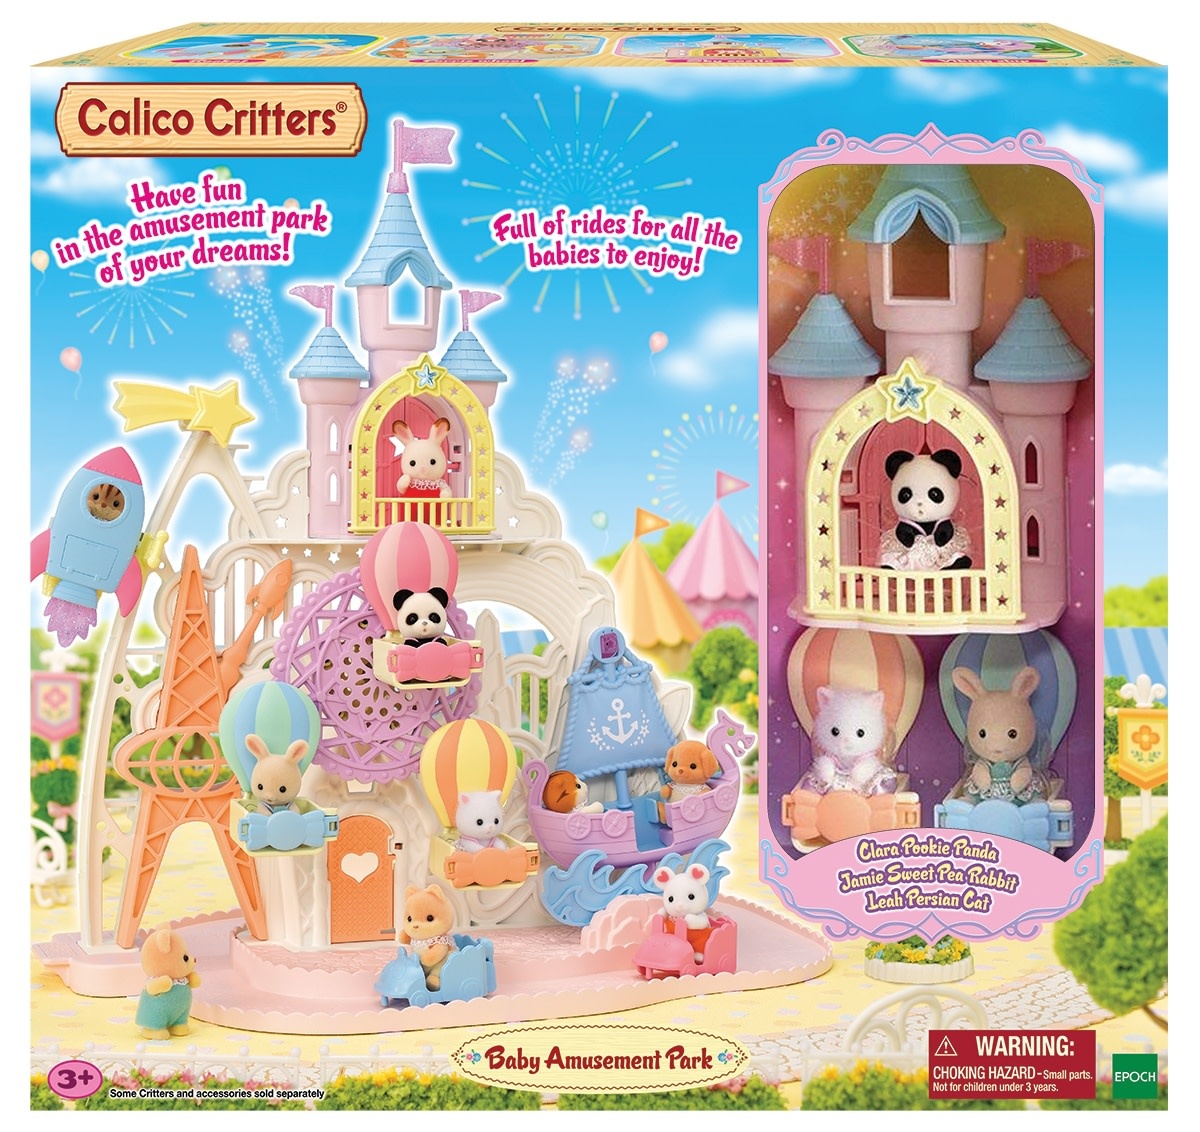 Calico Critters Calico Critters Dollhouse Playset, Baby Amusement Park